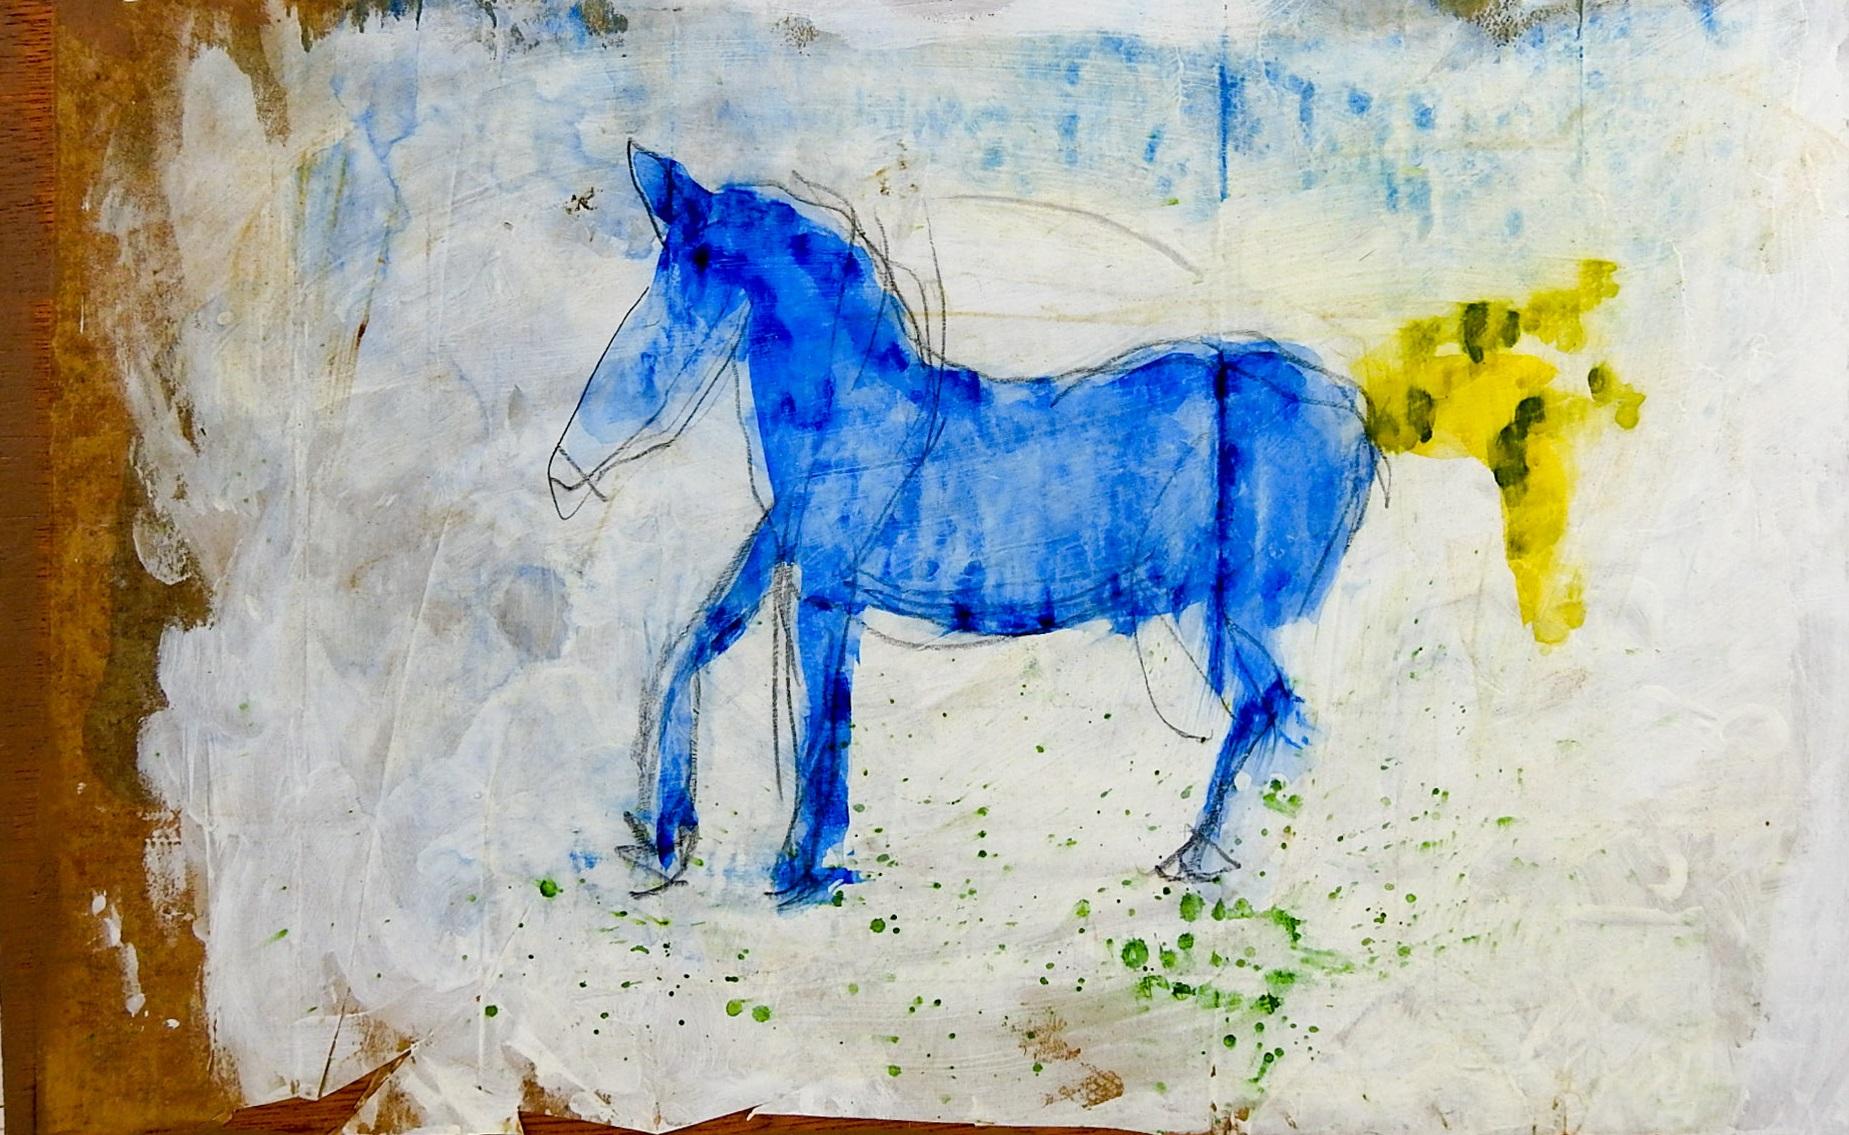 Early 21st century mixed media on paper painting of an abstract bright blue horse applied to a wood panel by George Turner (1943-2014), Illinois. From the estate of the artist. Unsigned. Unframed; no hanging hardware but could be hung as is. Paper